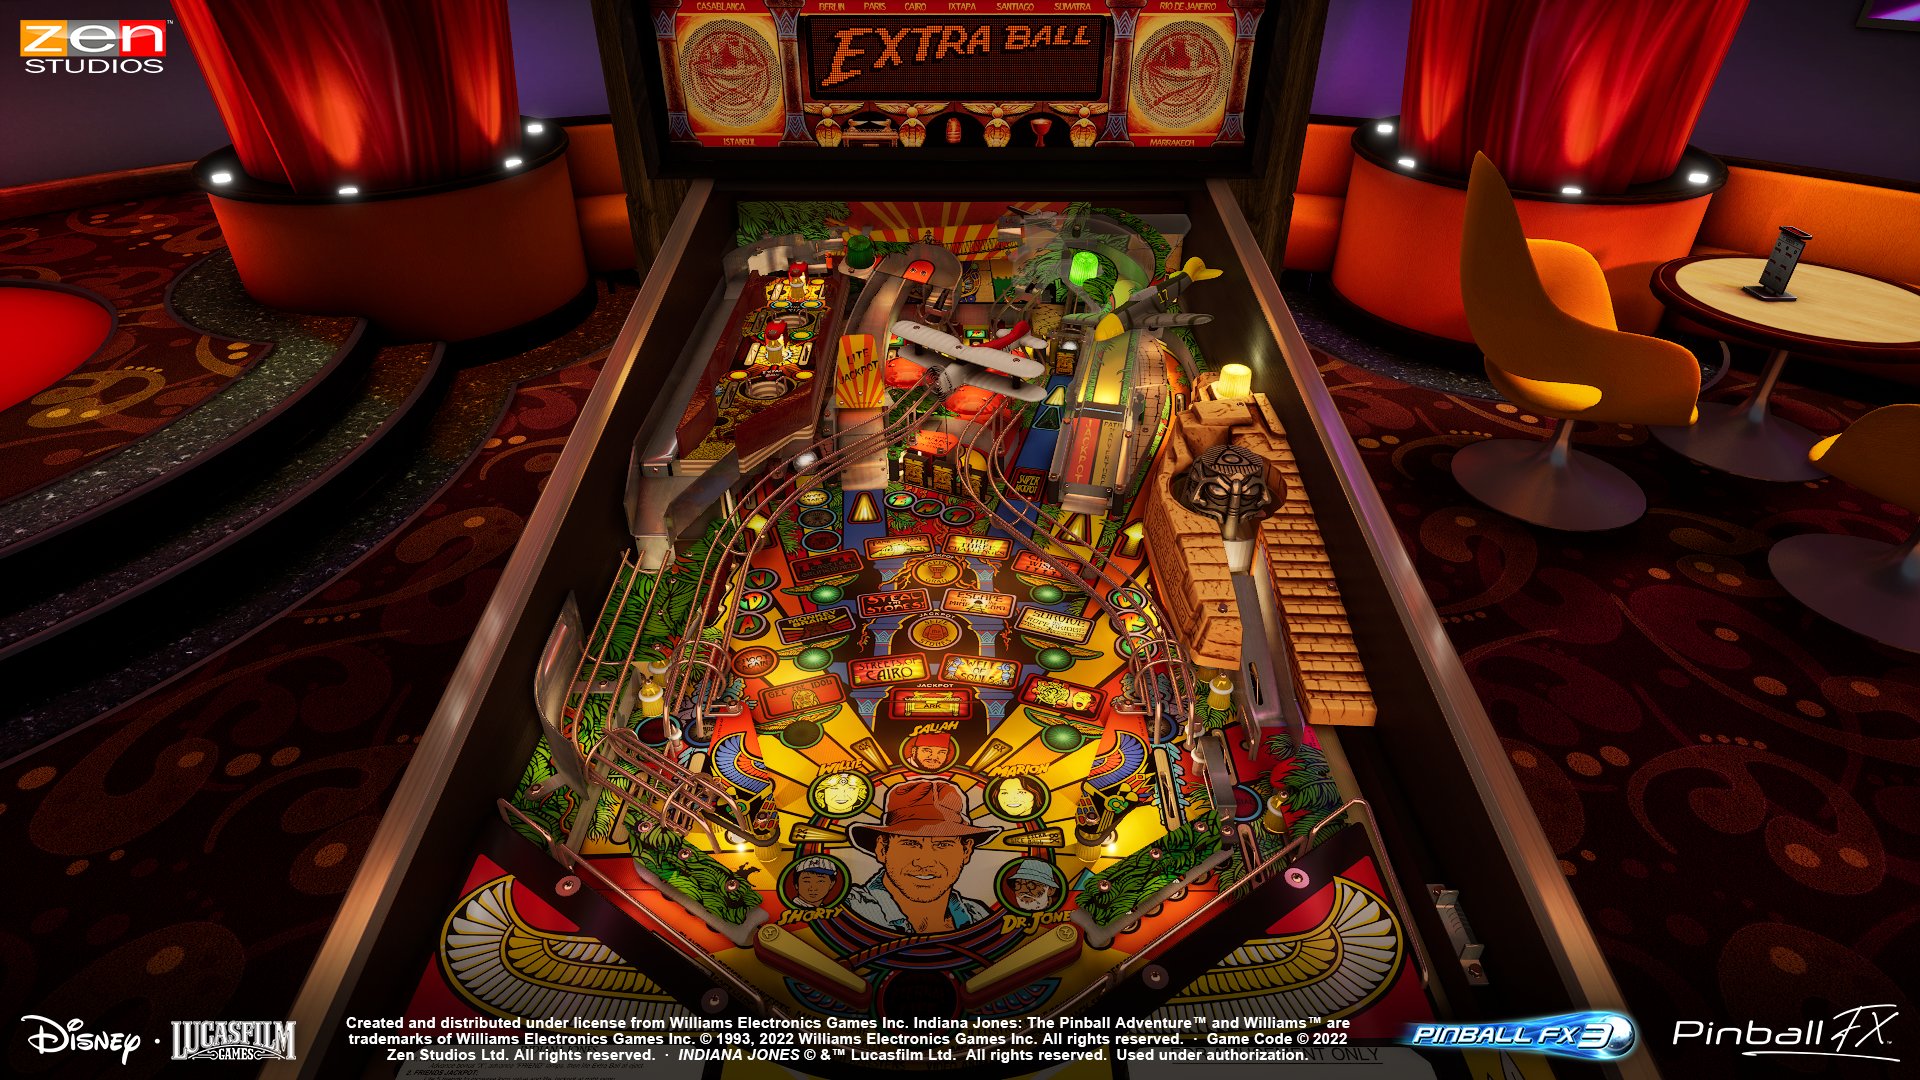 Zen Studios of the most requested pinball tables is coming to both Pinball FX and Pinball FX3! The first digital version of Indiana Jones: The Pinball Adventure is releasing